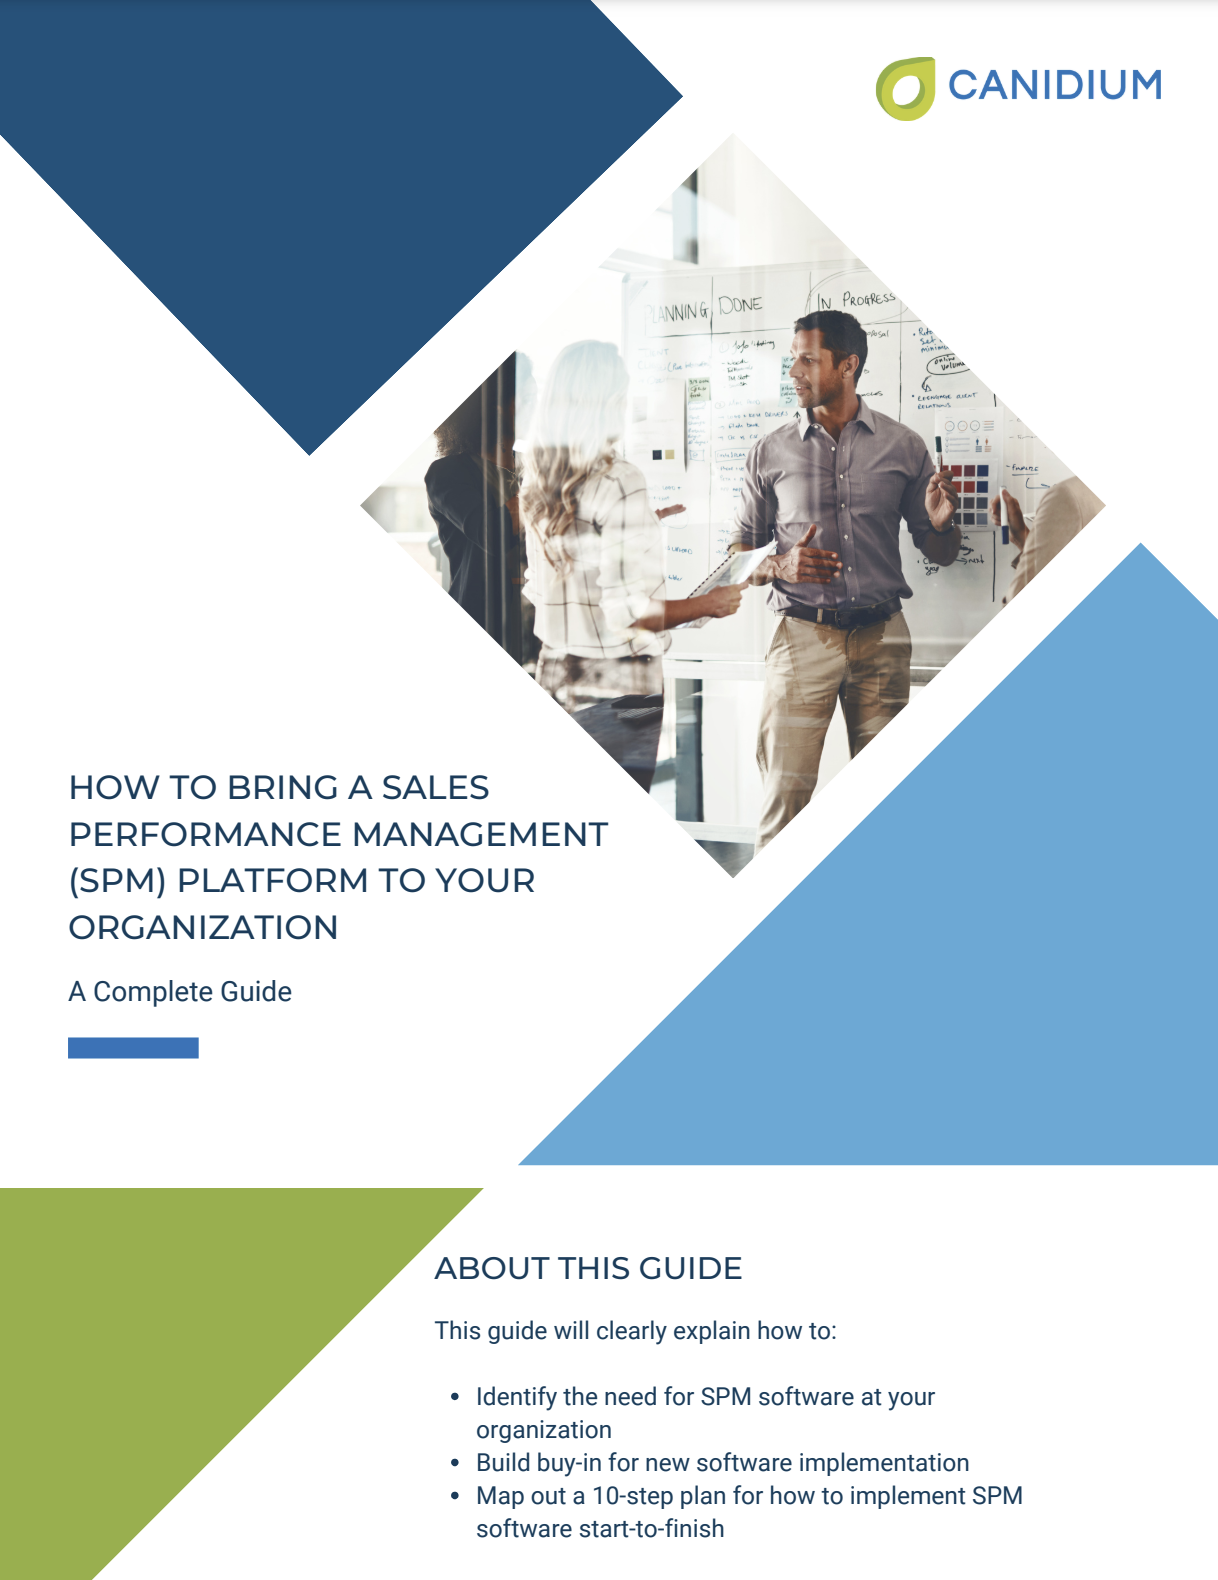 How to bring a Sales Performance Management platform to your organization